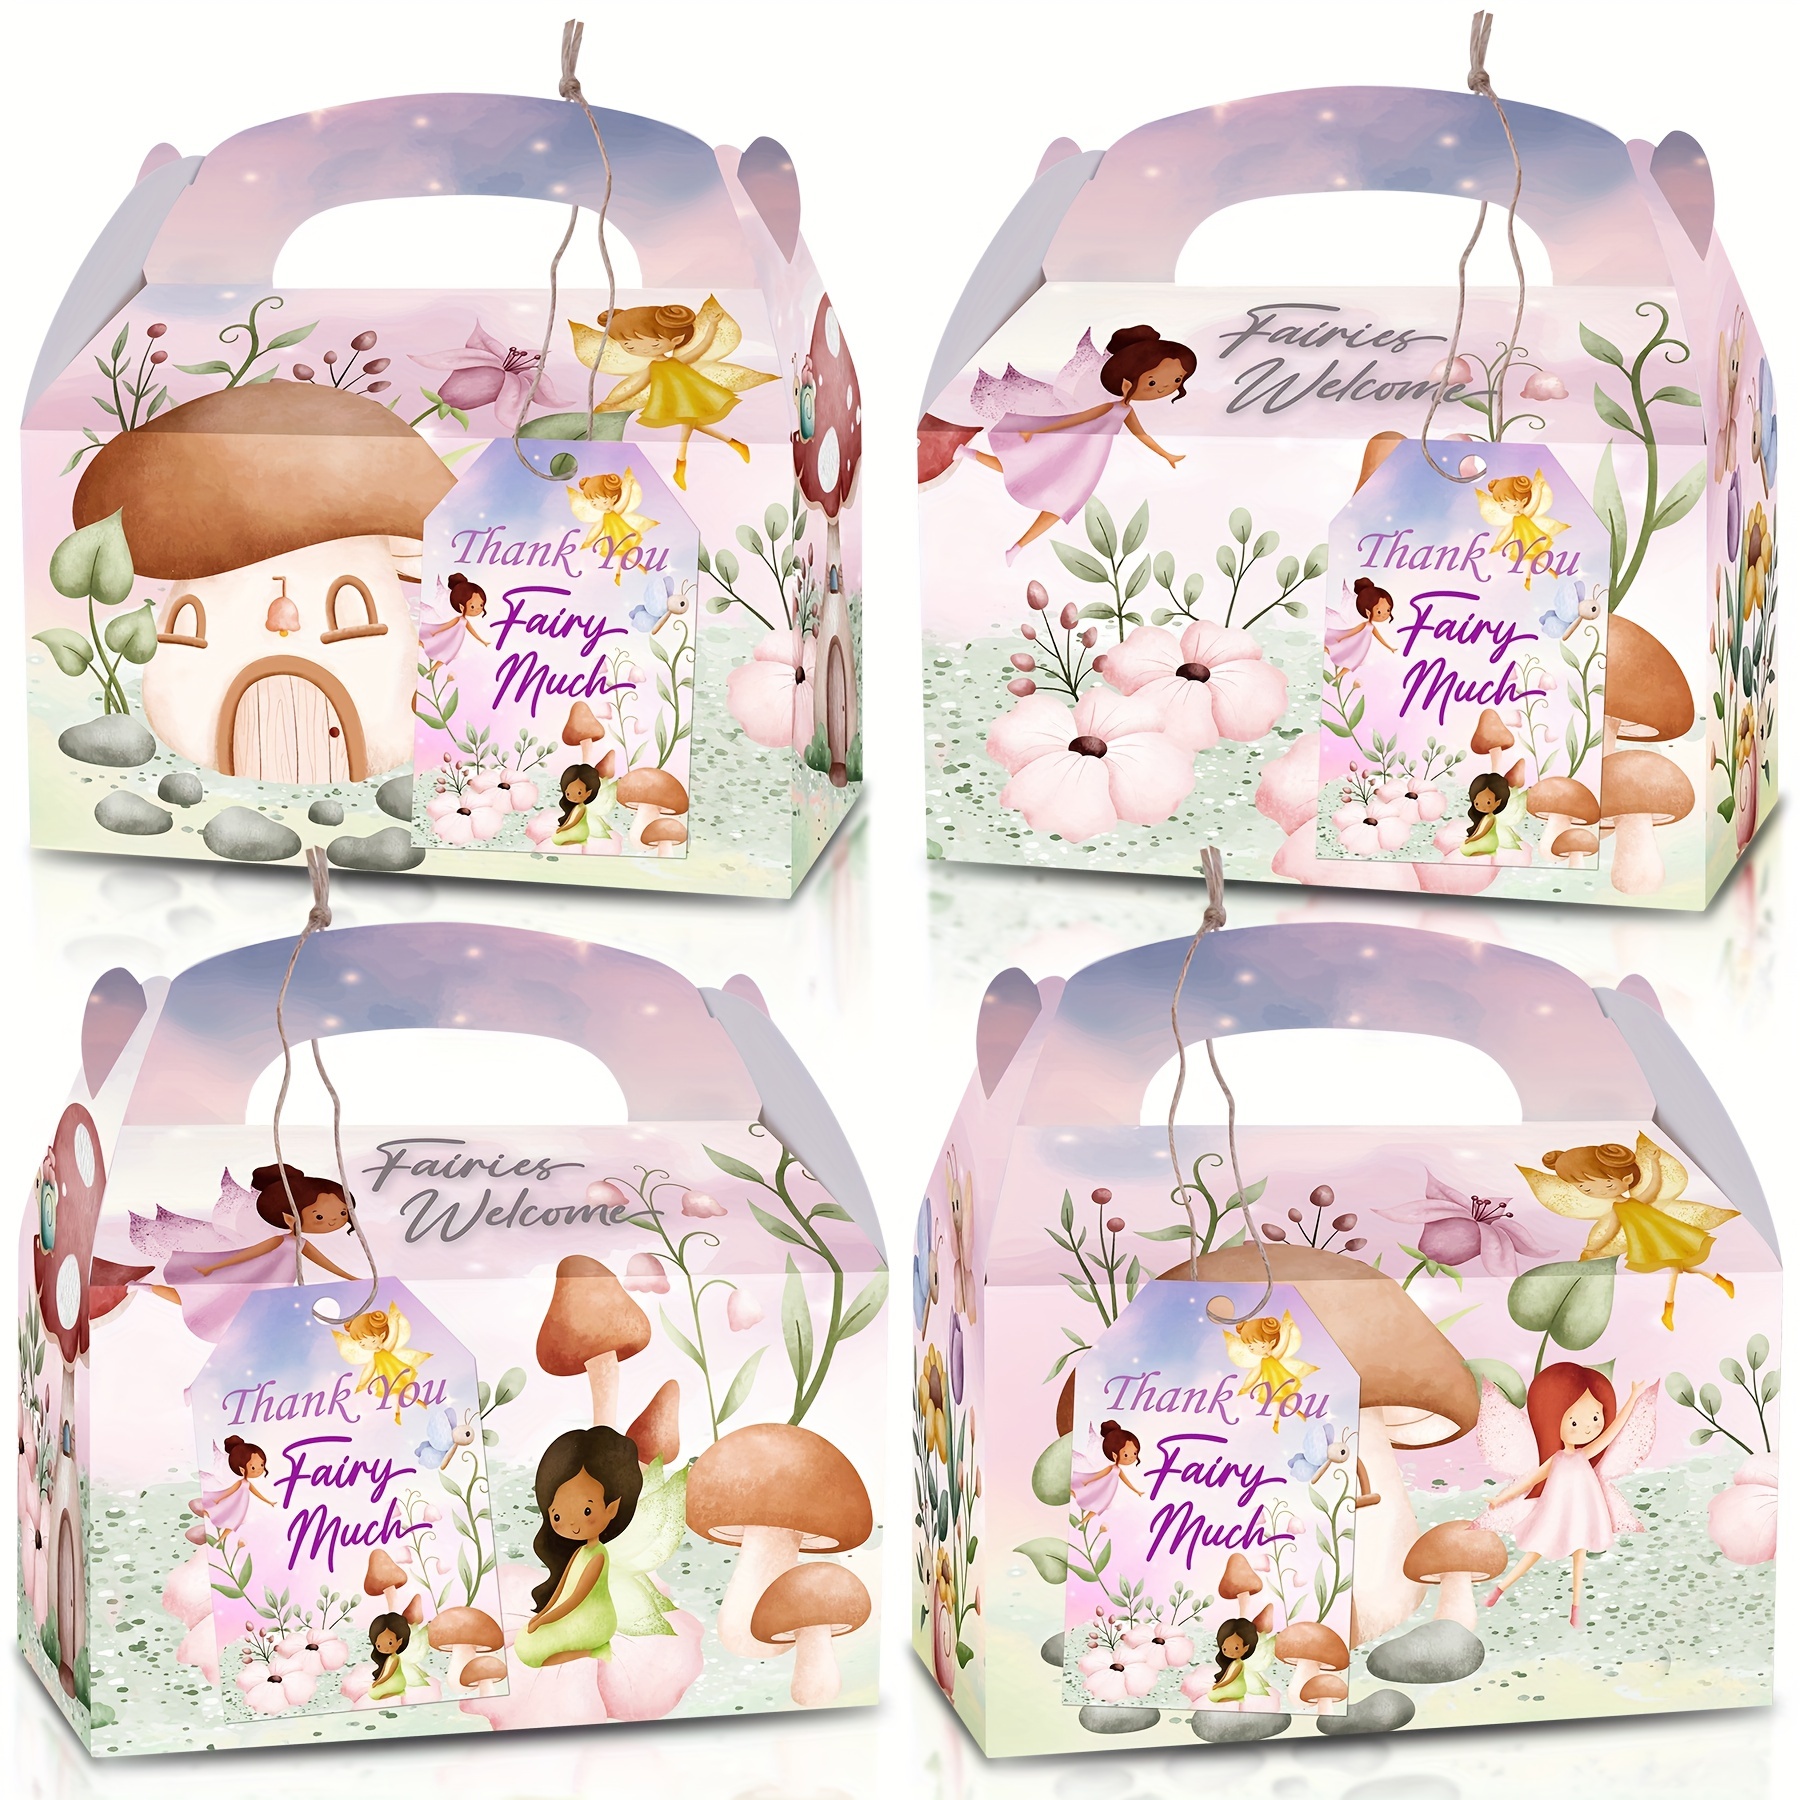 

12pcs Dreamy Colorful Fairy Tale Party Favors Gift Bags - Perfect For Birthday, Baby Shower, And Baby Girl Celebrations!